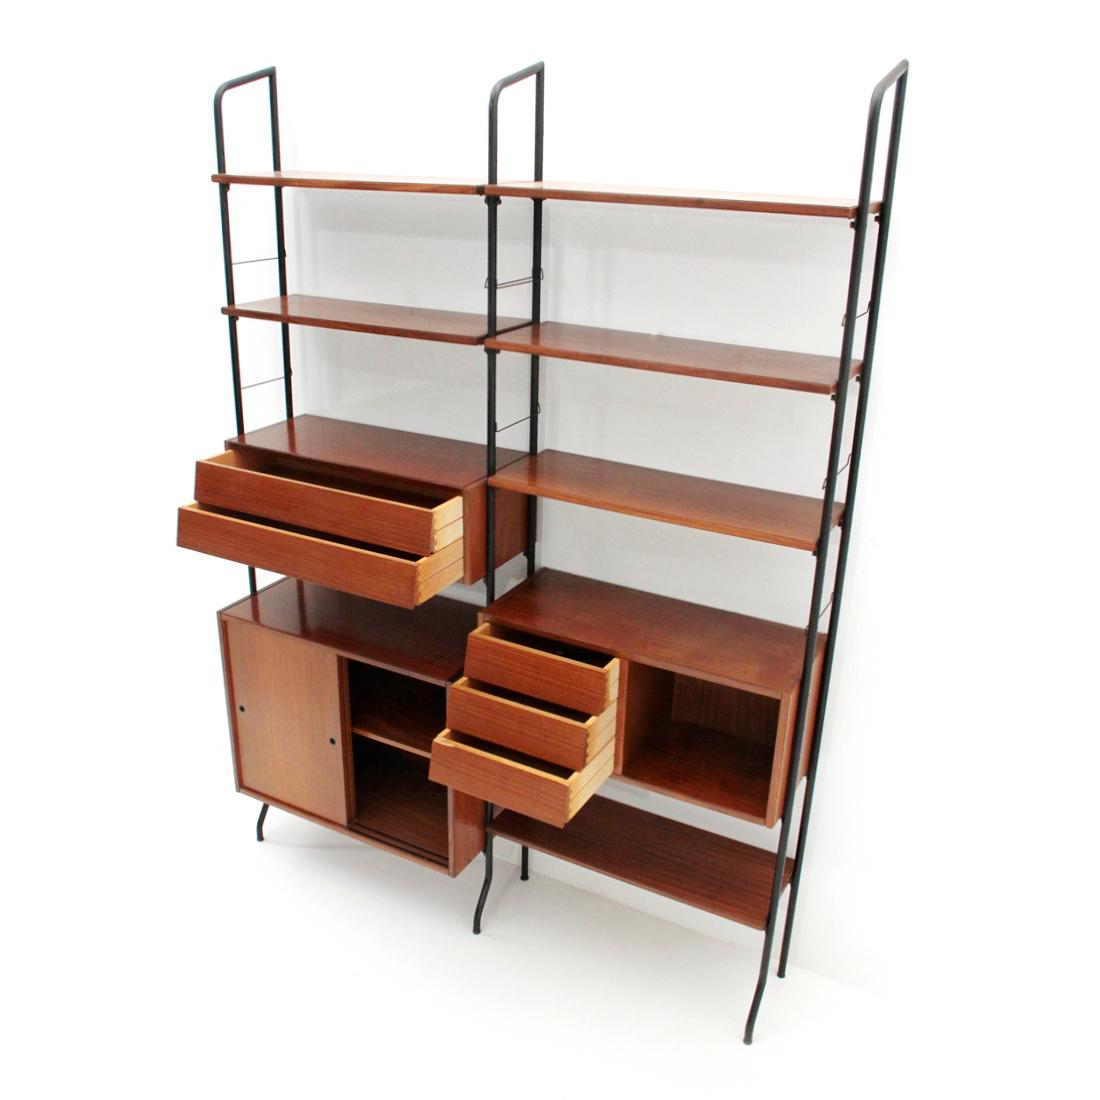 Mid-20th Century Italian Midcentury Aedes Wall Unit by Amma, 1950s